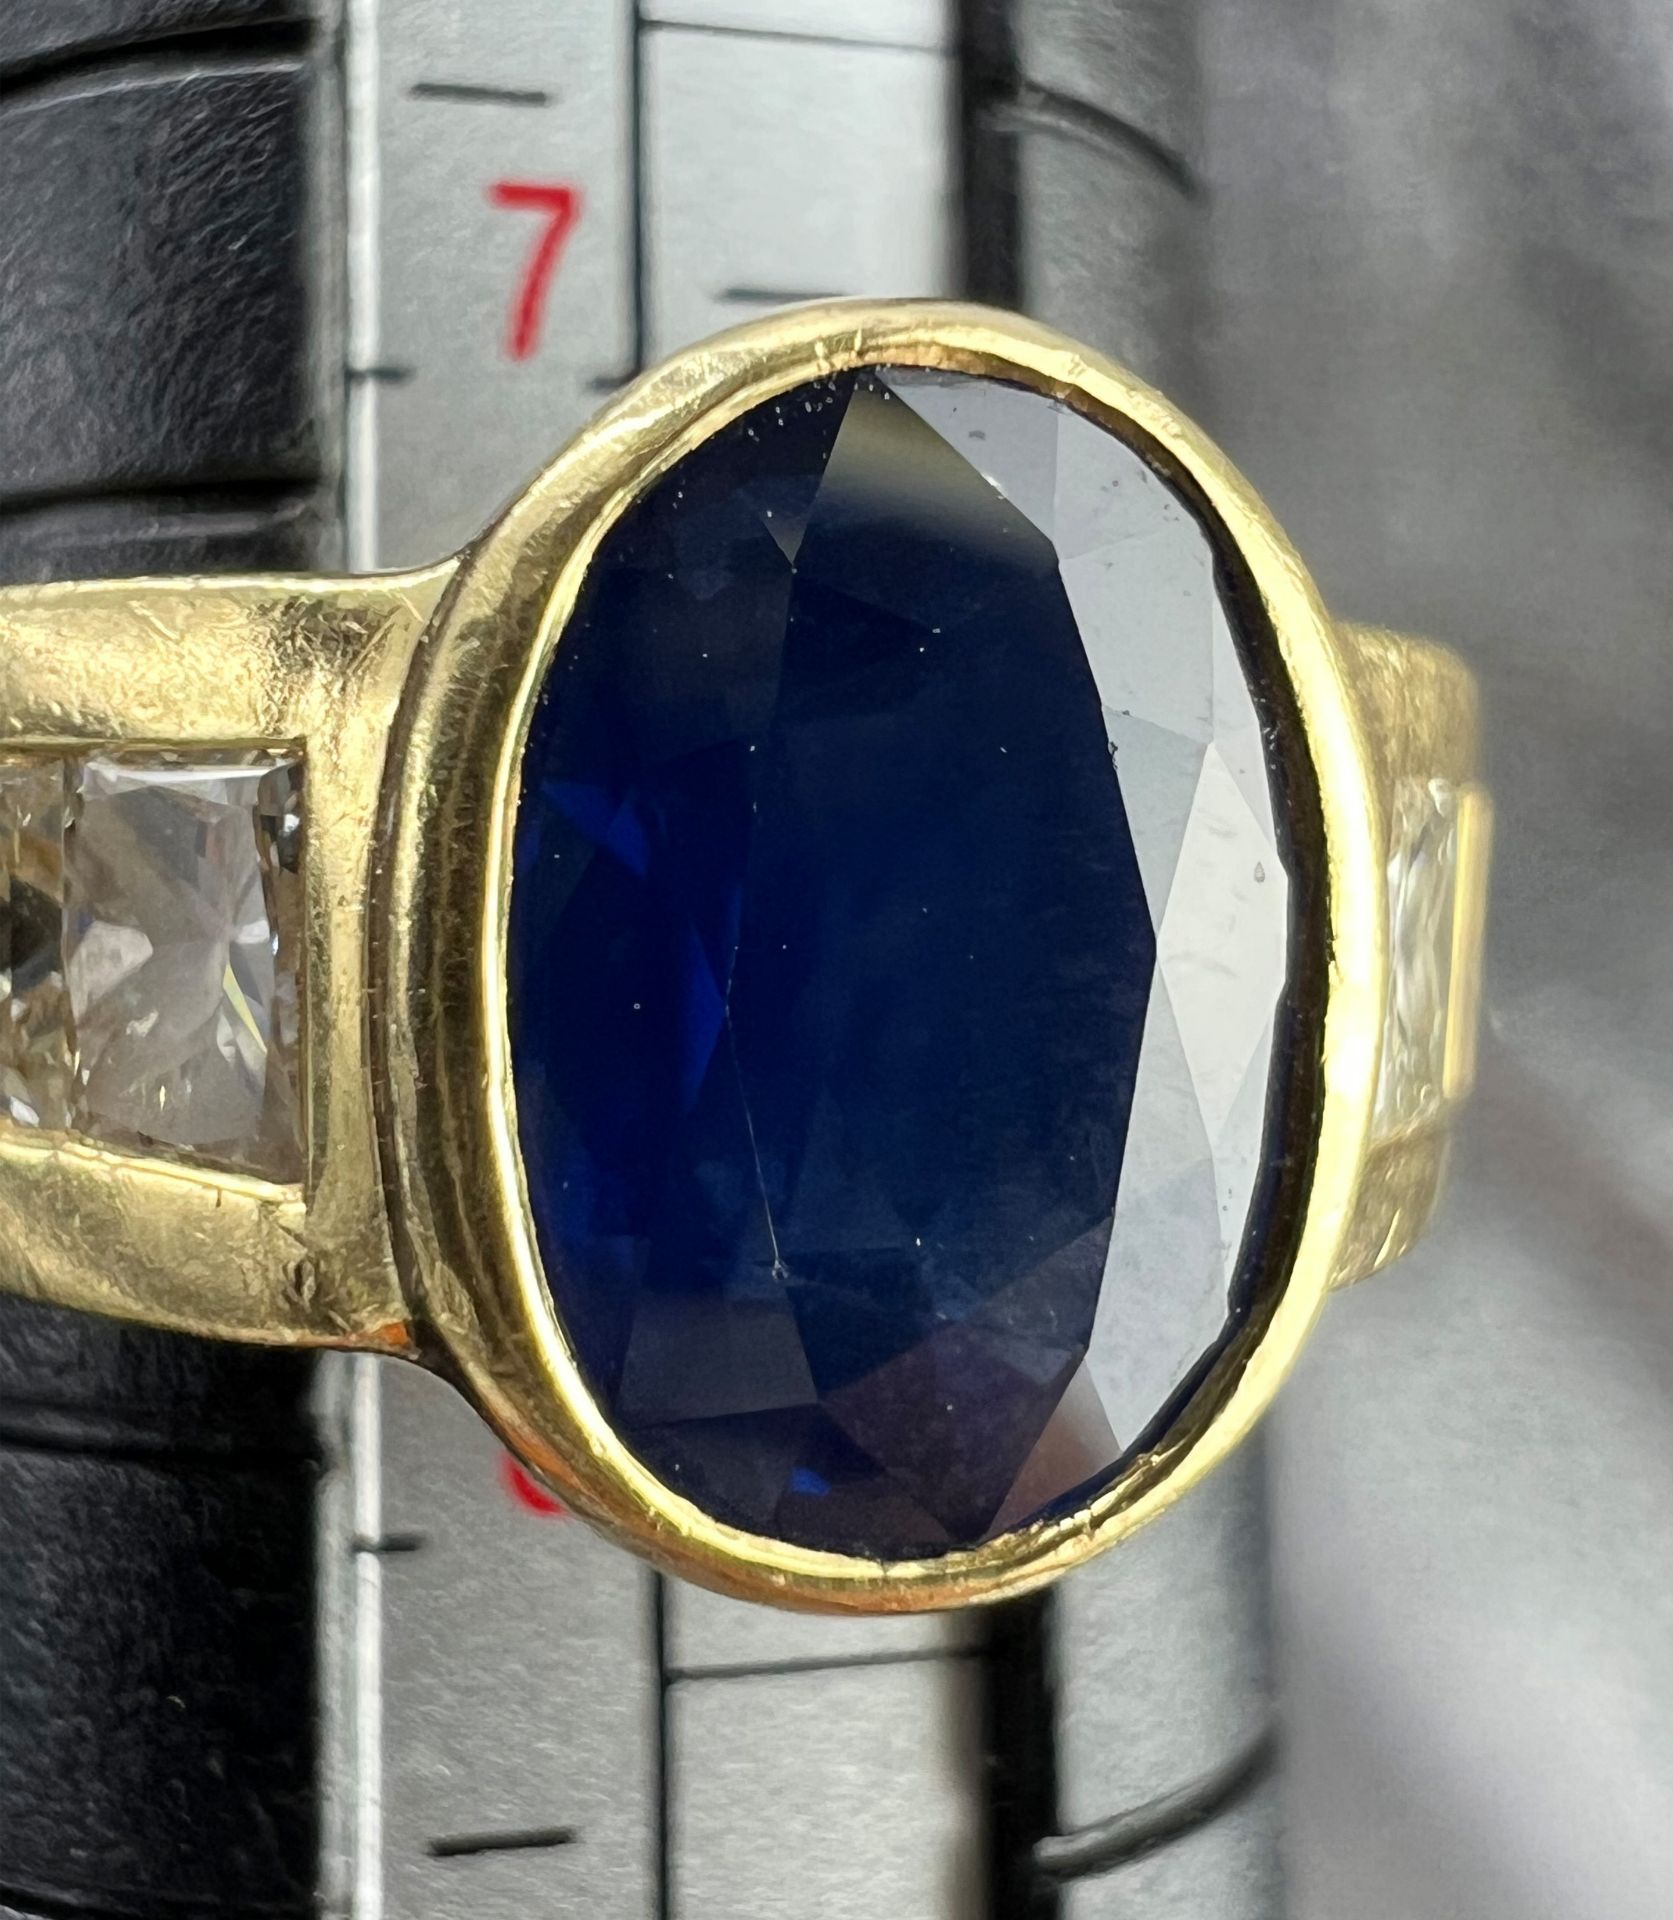 Ladies' ring. 750 yellow gold. 1 blue colored stone and 4 diamonds. - Image 7 of 10